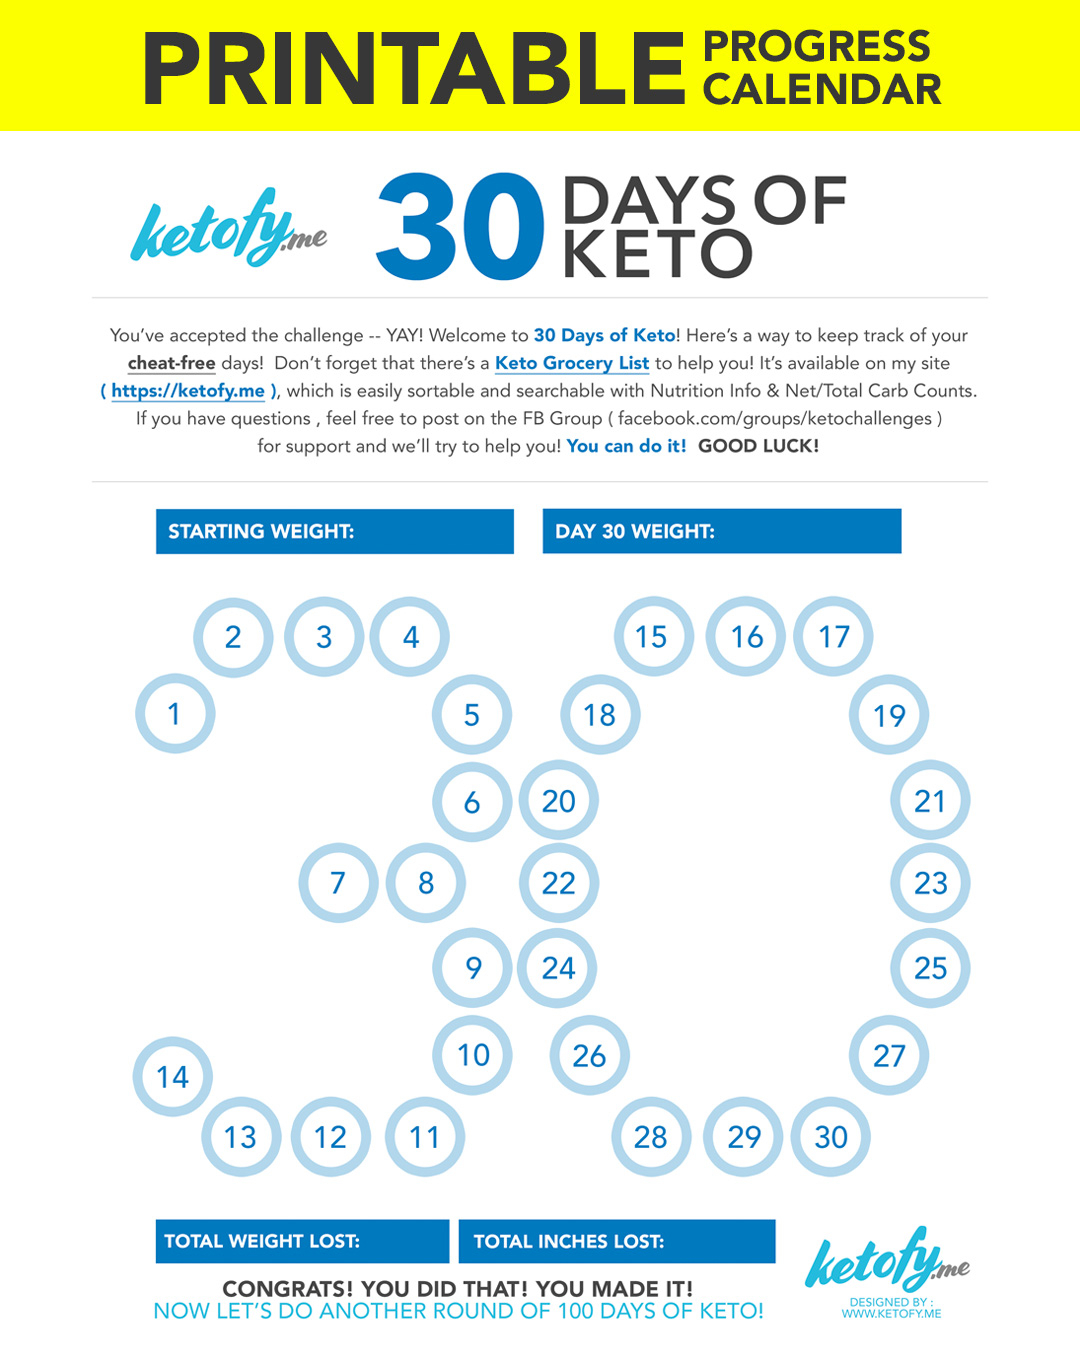 Keto ~ Fy Me | Cut Carbs, Not Flavor! • 30 Days Of Keto within 100 Days Of Keto Calendar